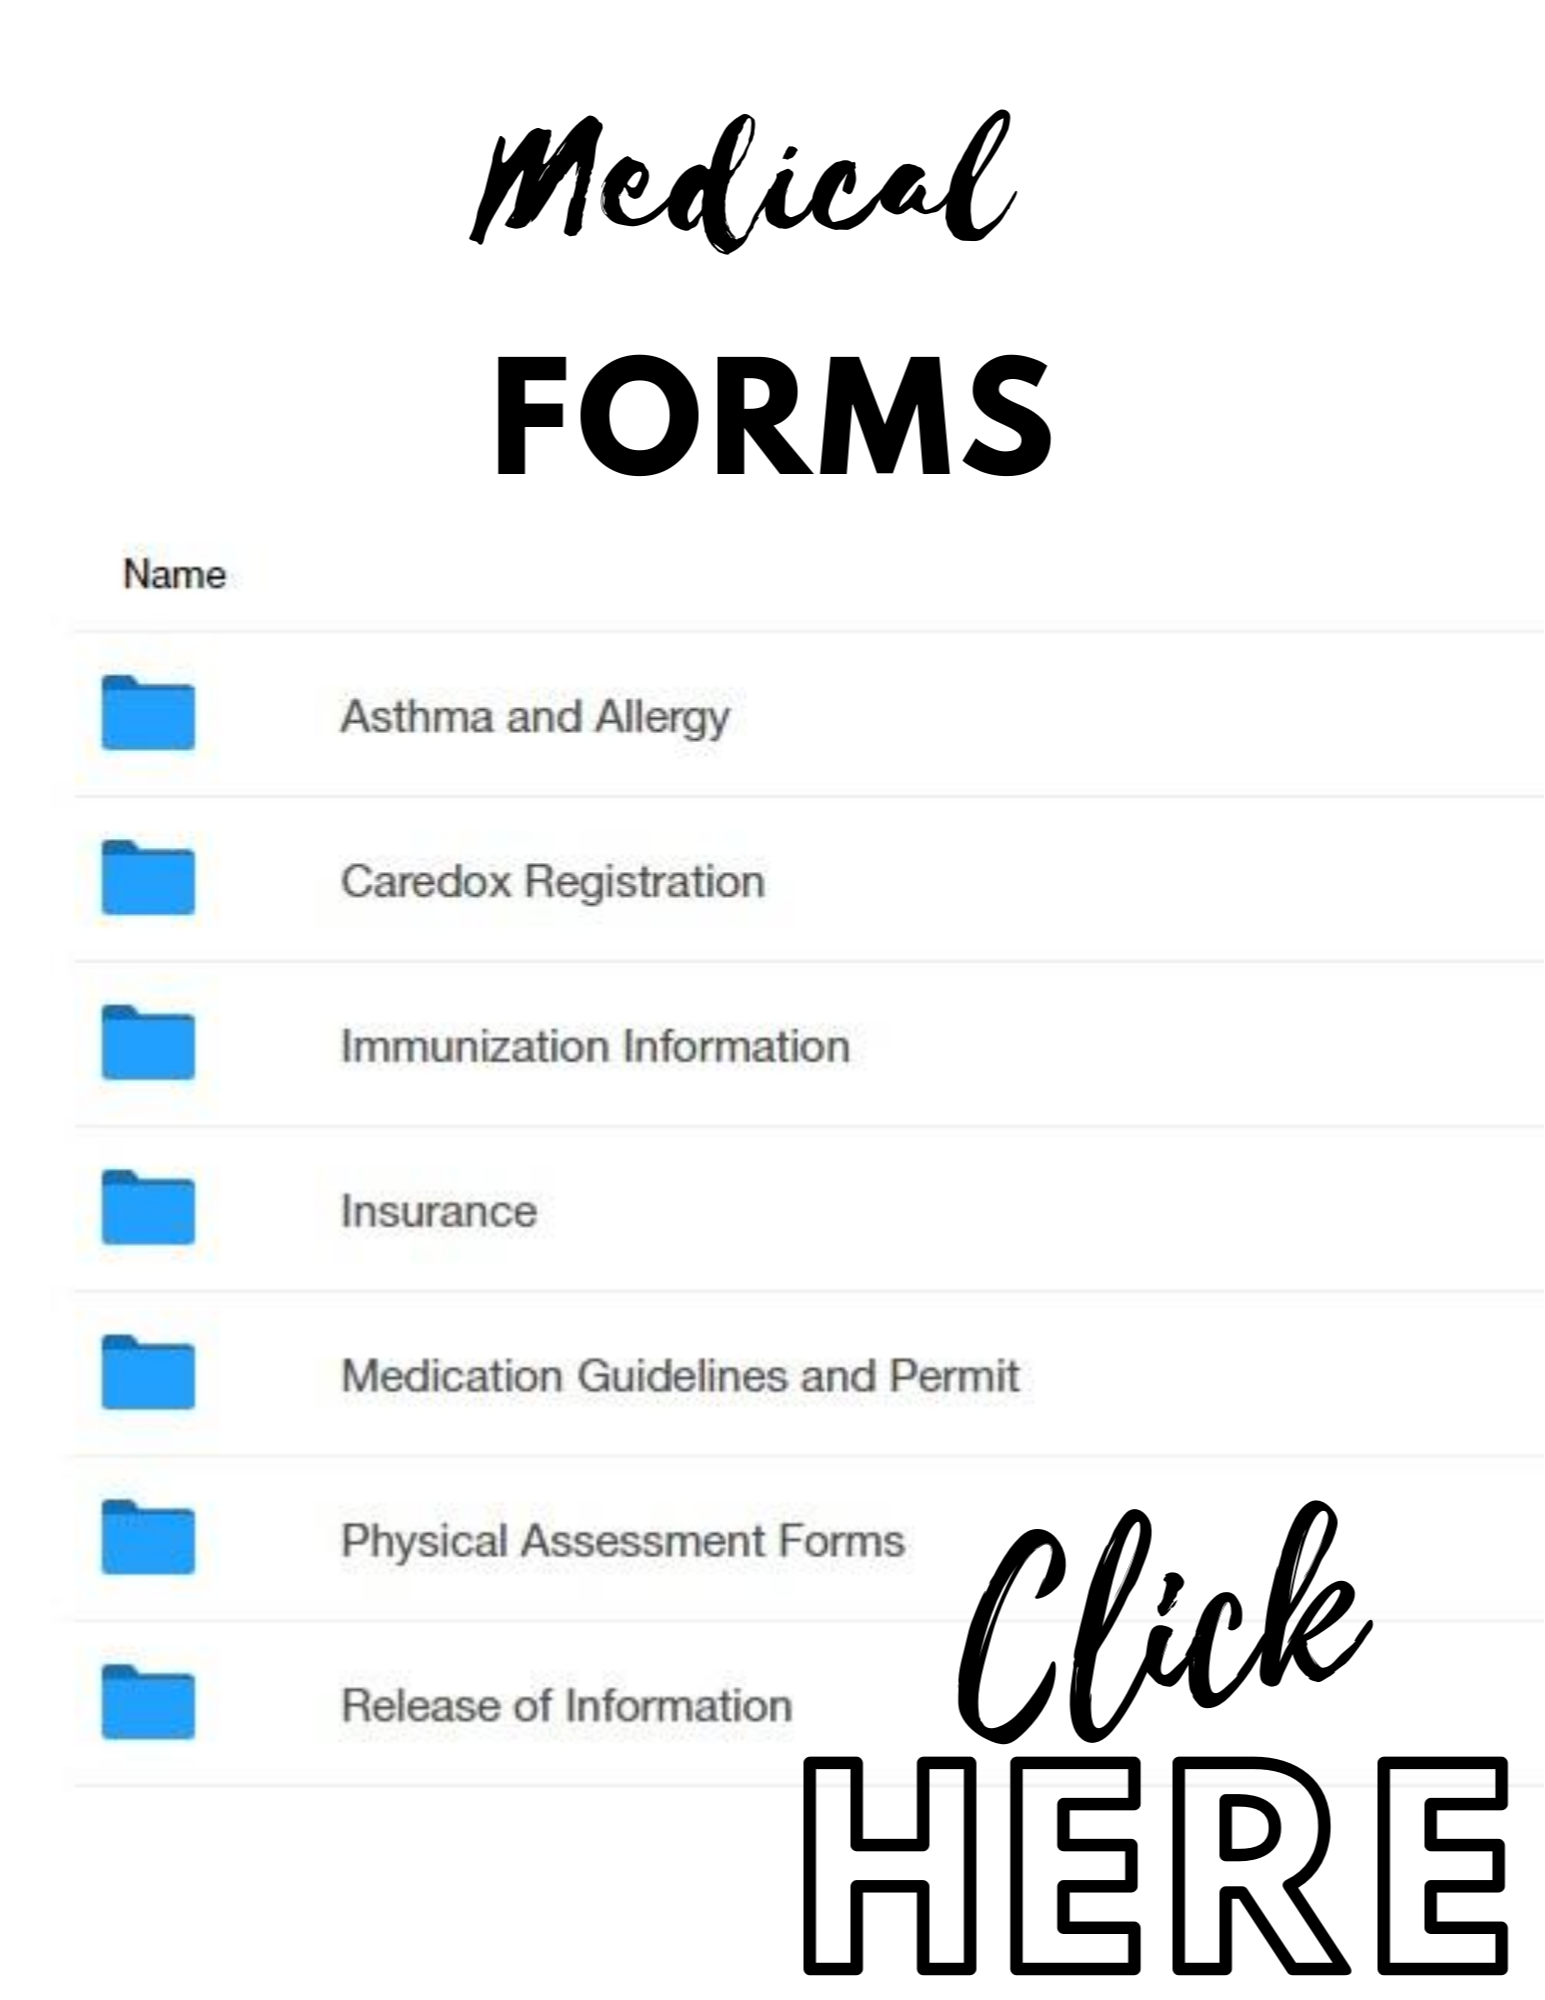 Medical Forms Click HERE: image of folders named Asthma and Allergy, Caredox Registration, Immunization Information, Insurance, Medication Guidelines and Permit, Physical Ssessment Forms, Release of Information